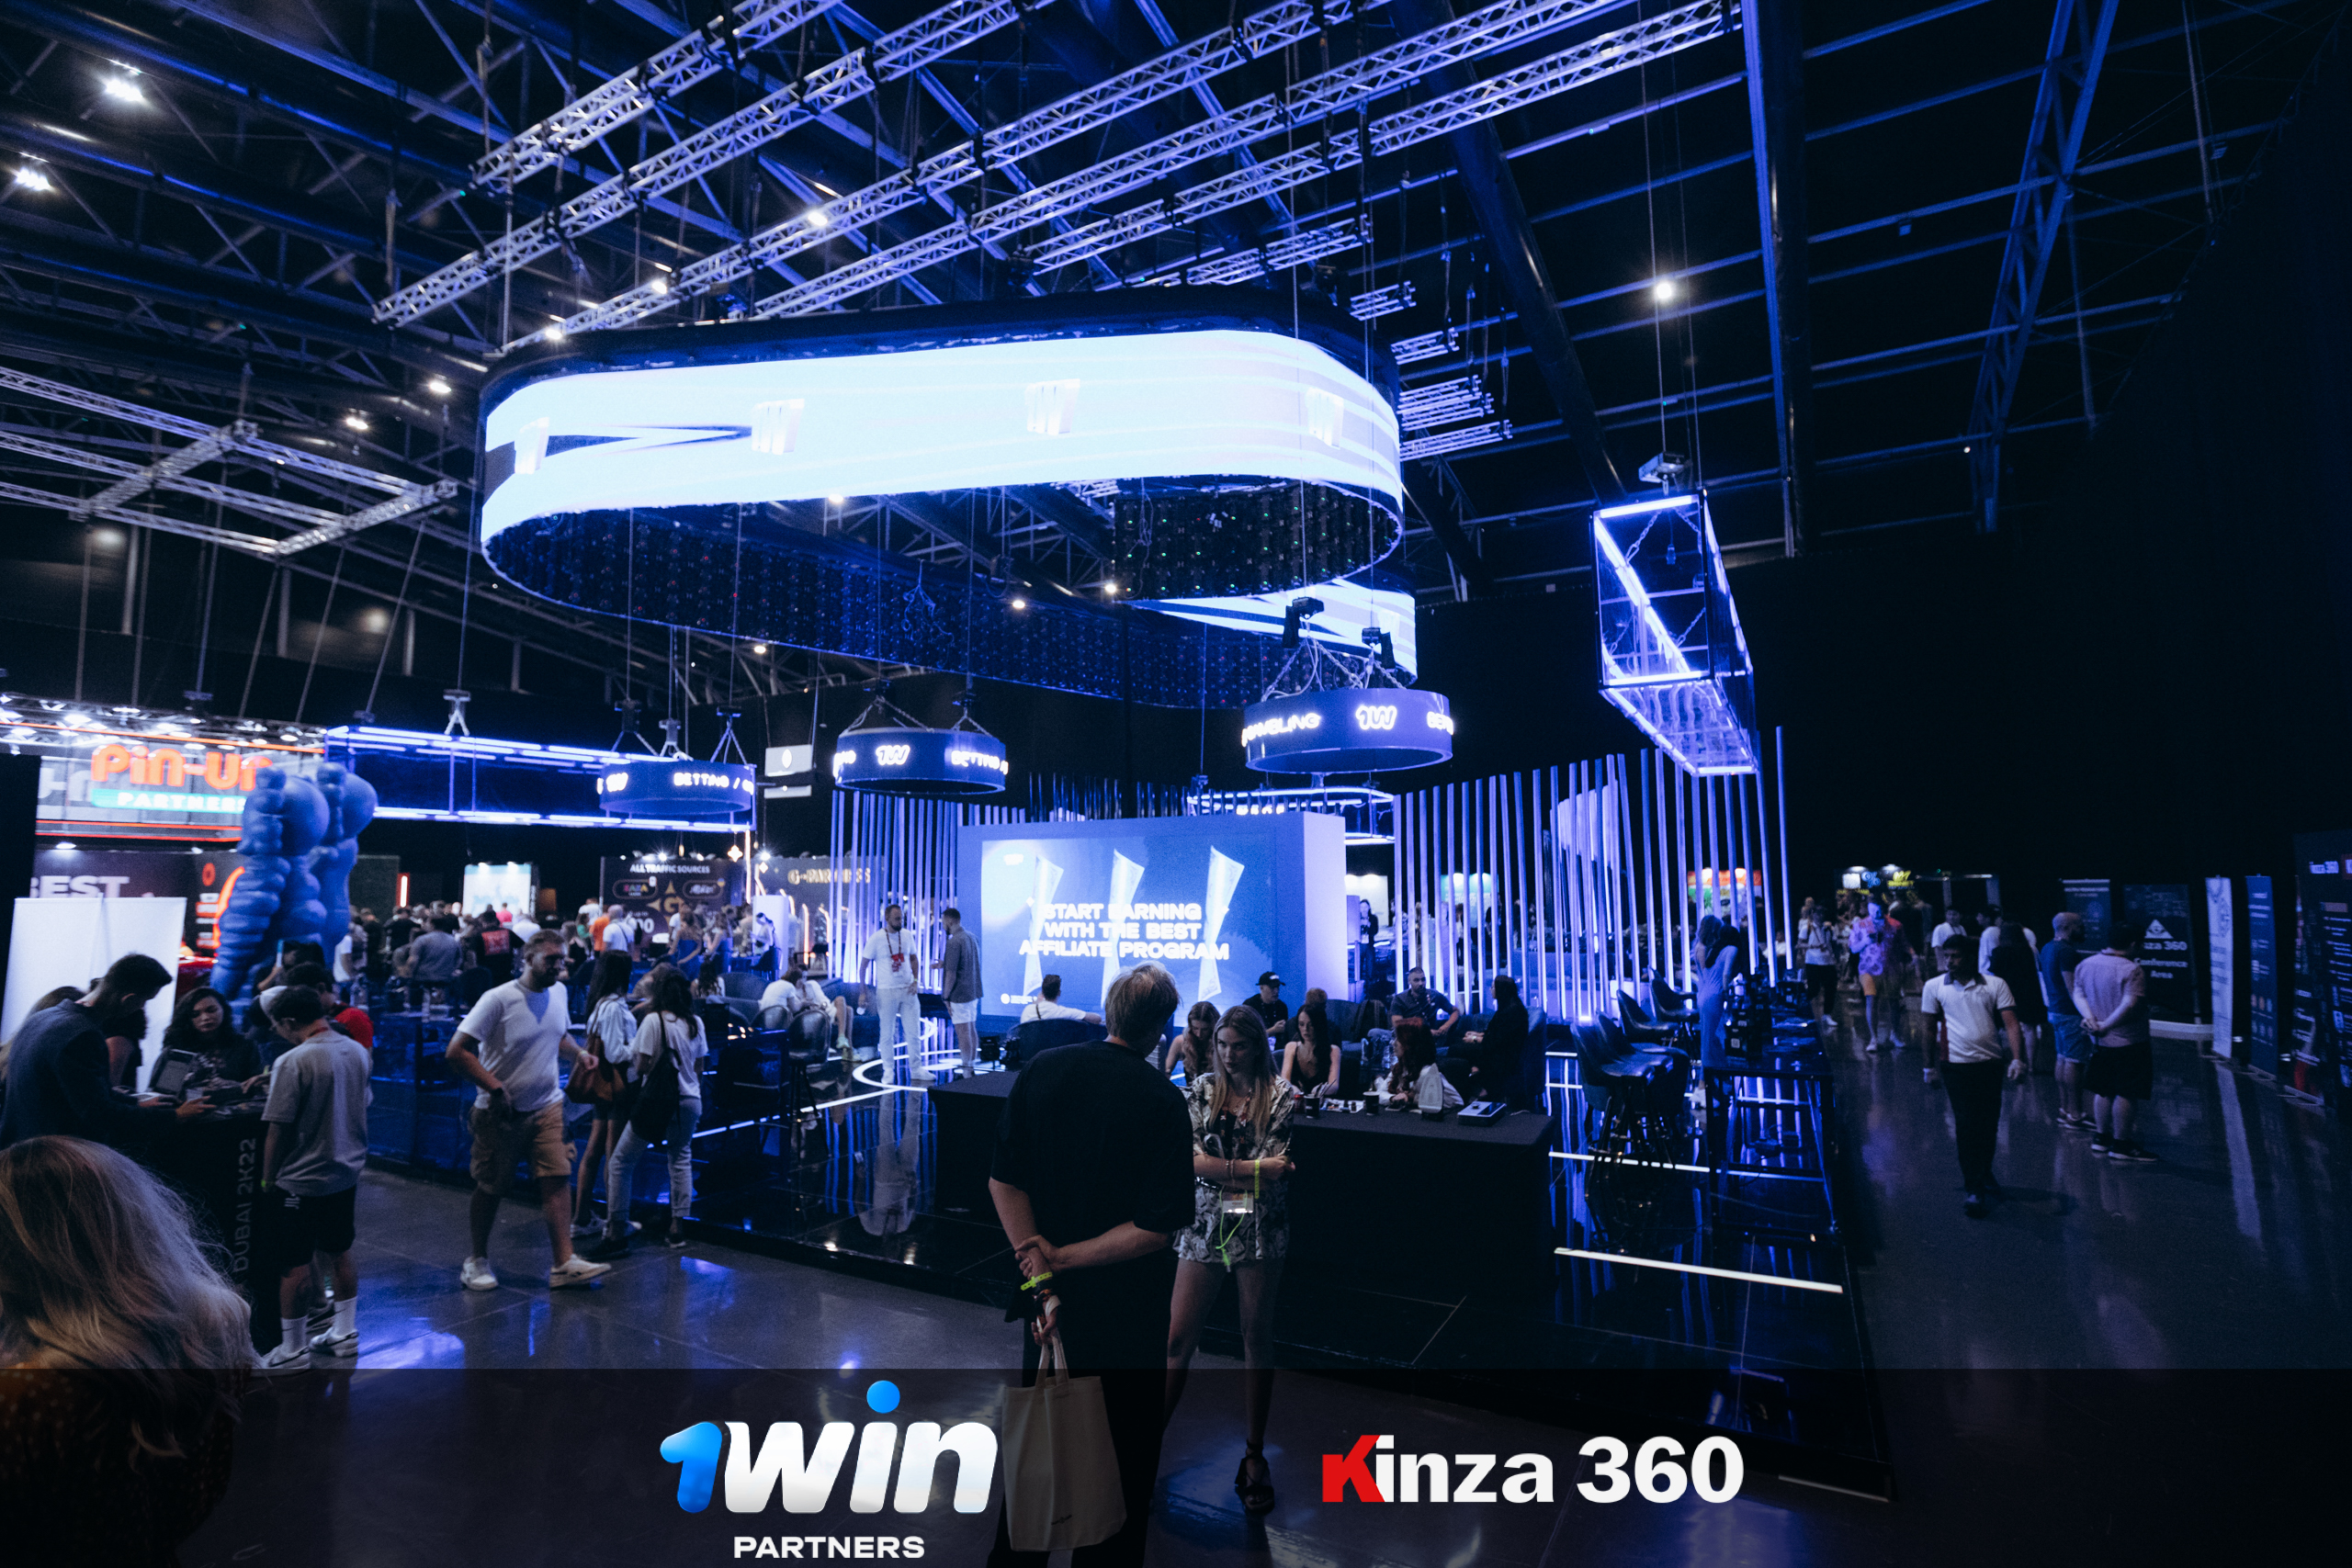 KINZA 360 Hosted Their First-ever International Affiliate Conference in Dubai